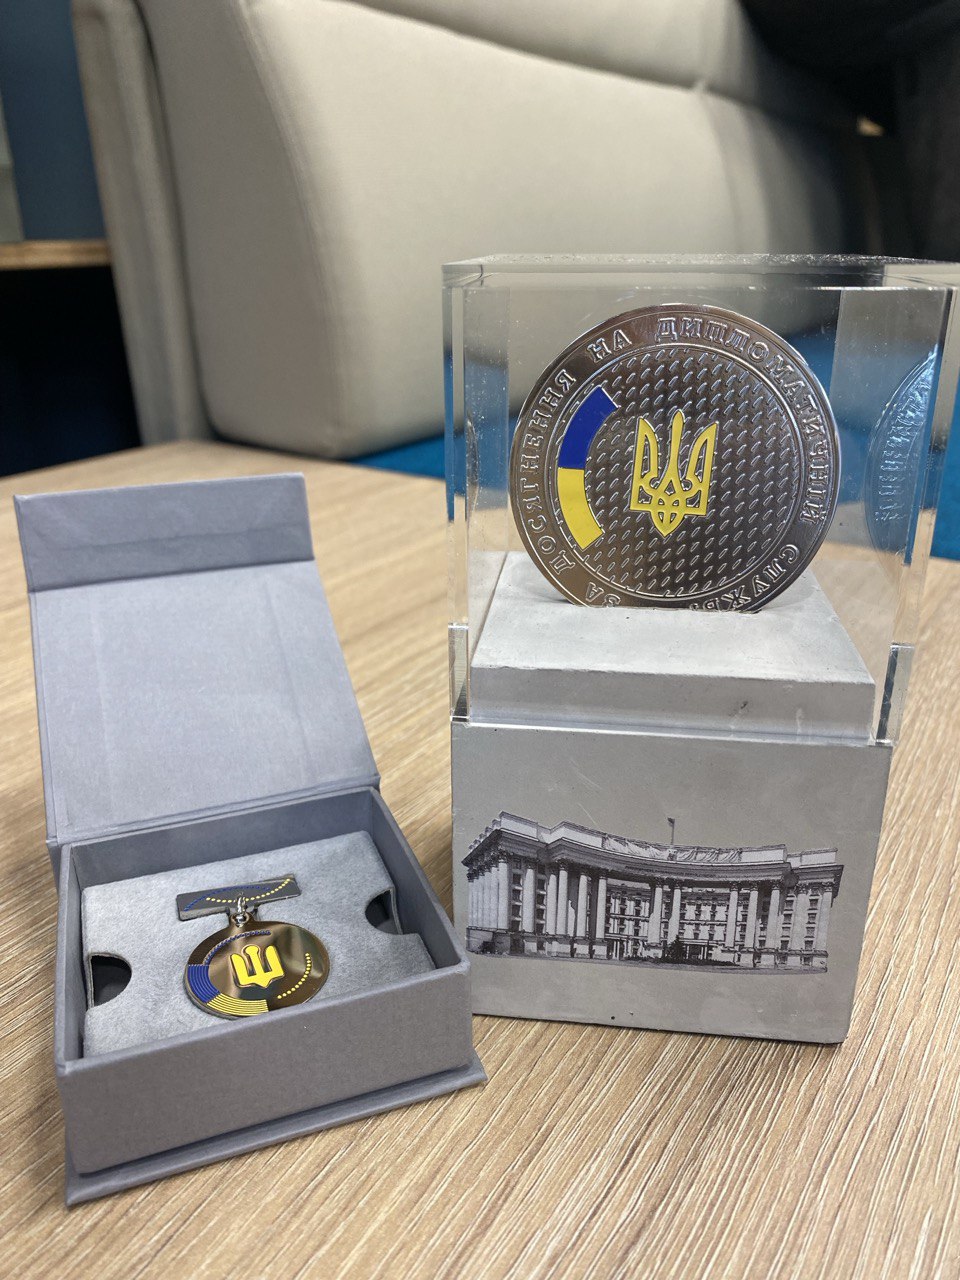 New Products Group has received the award “For Supporting Ukrainian Diplomacy”: it was granted personally by the Minister of Foreign Affairs of Ukraine, Dmytro Kuleba